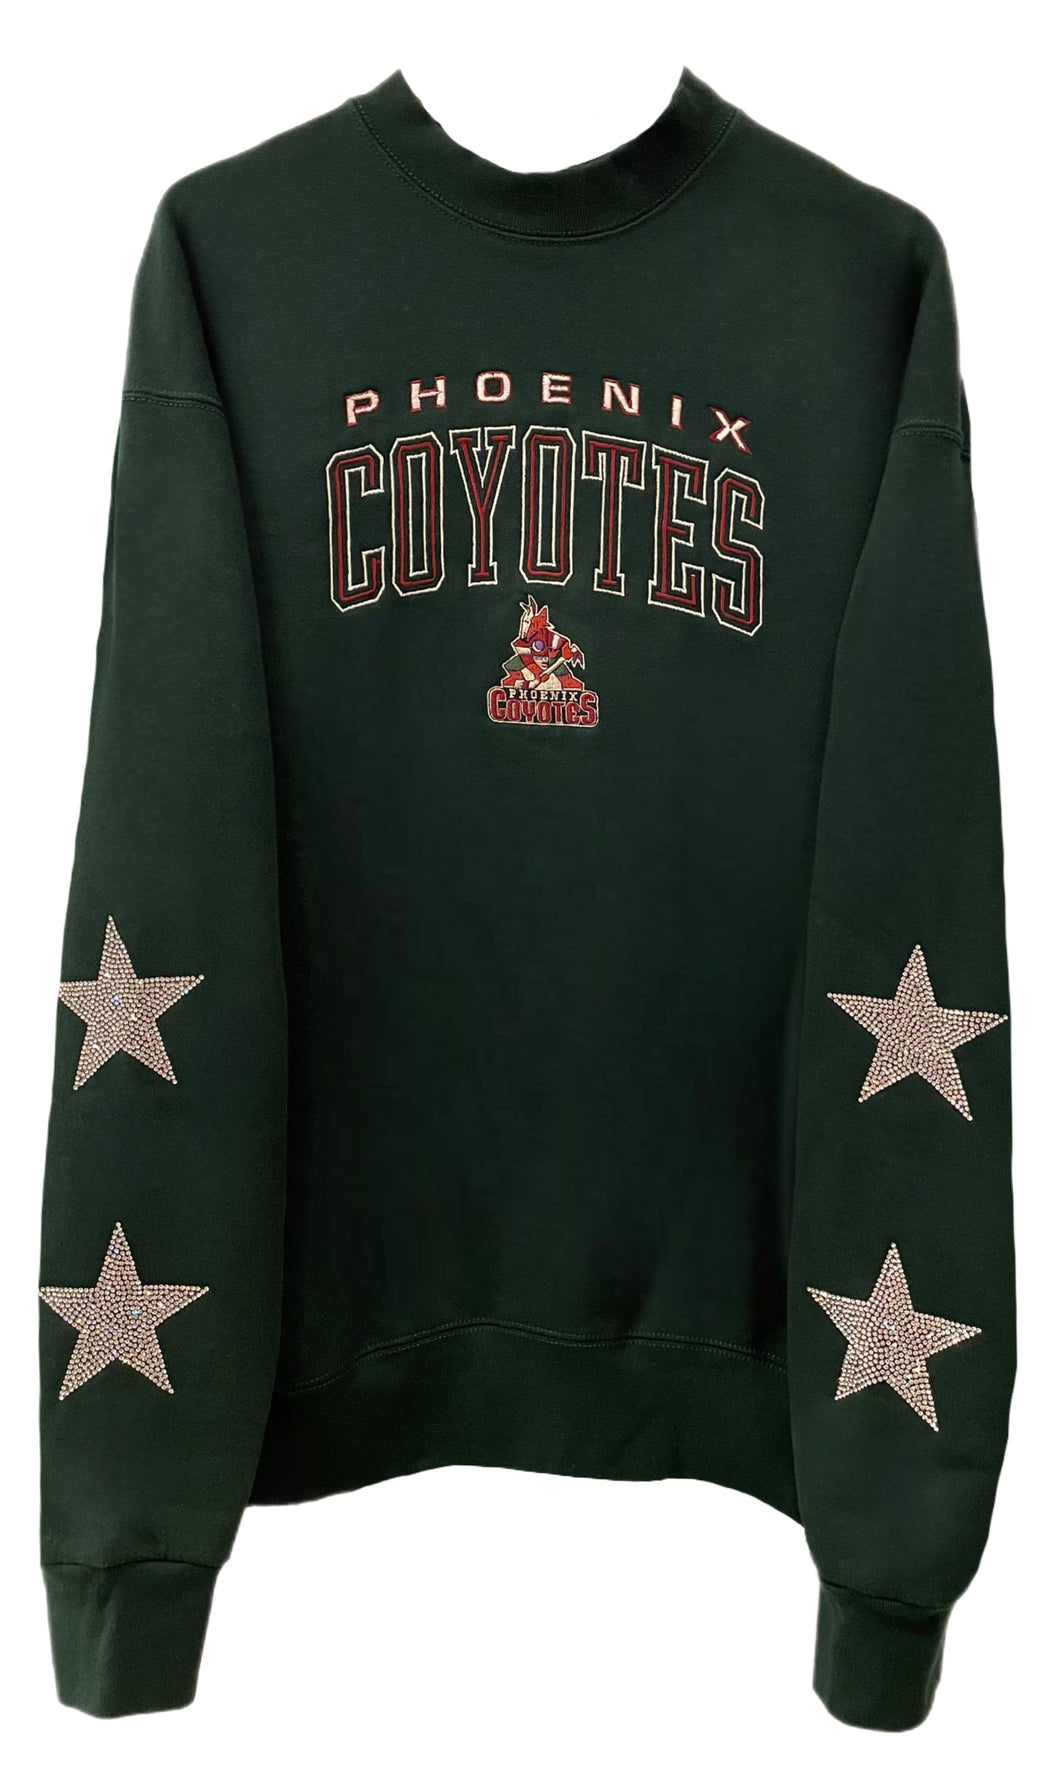 Phoenix Coyotes, NHL “Rare Find” One of a KIND Vintage Sweatshirt with Crystal Star Design